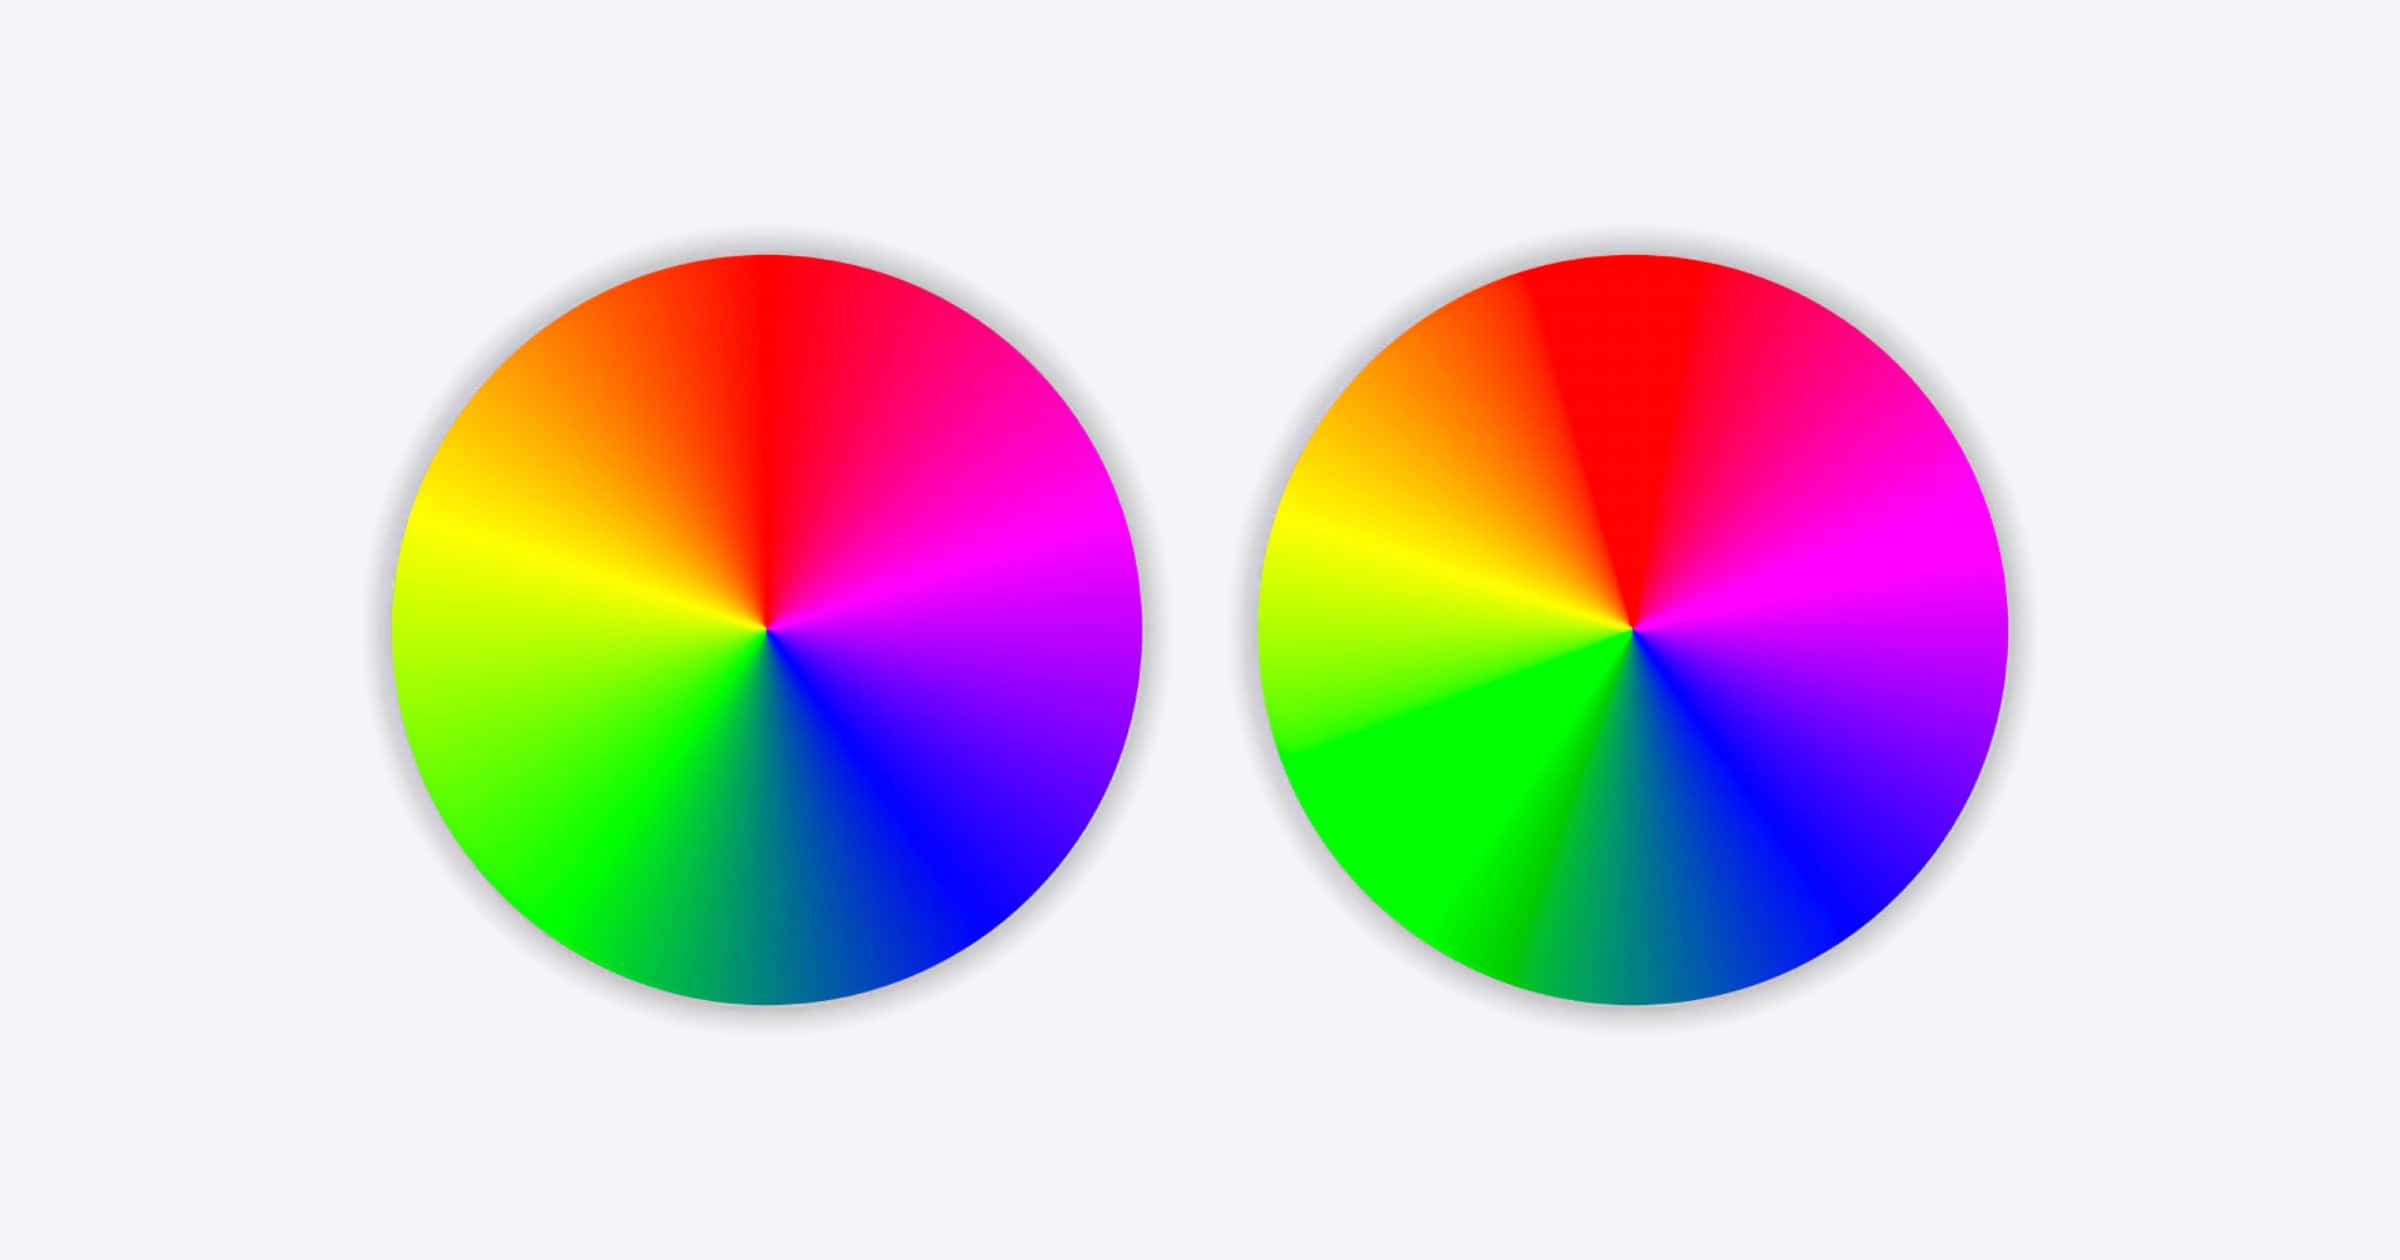 Safari Now Supports Wide Color Gamut 2D Graphics Using HTML Canvas